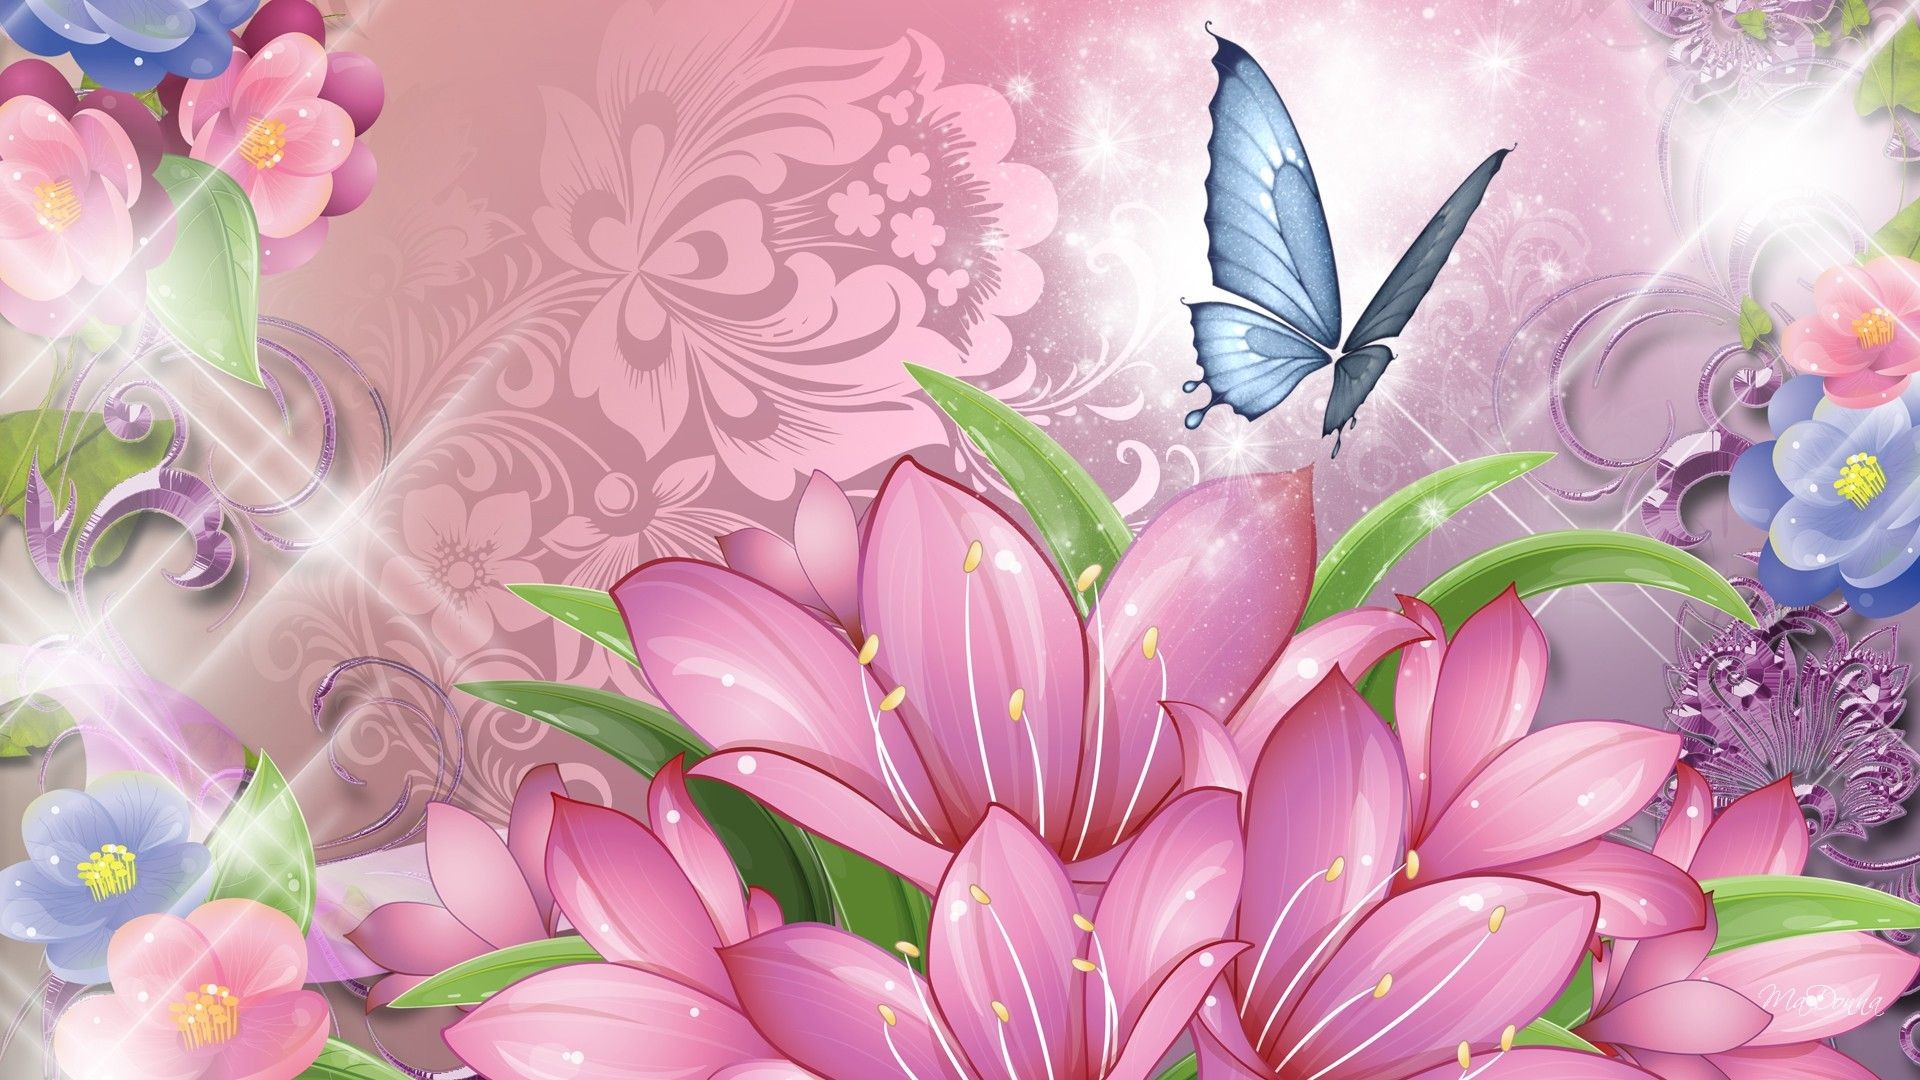 1920x1080 purple butterfly flowers wallpaper abstract - Google Search